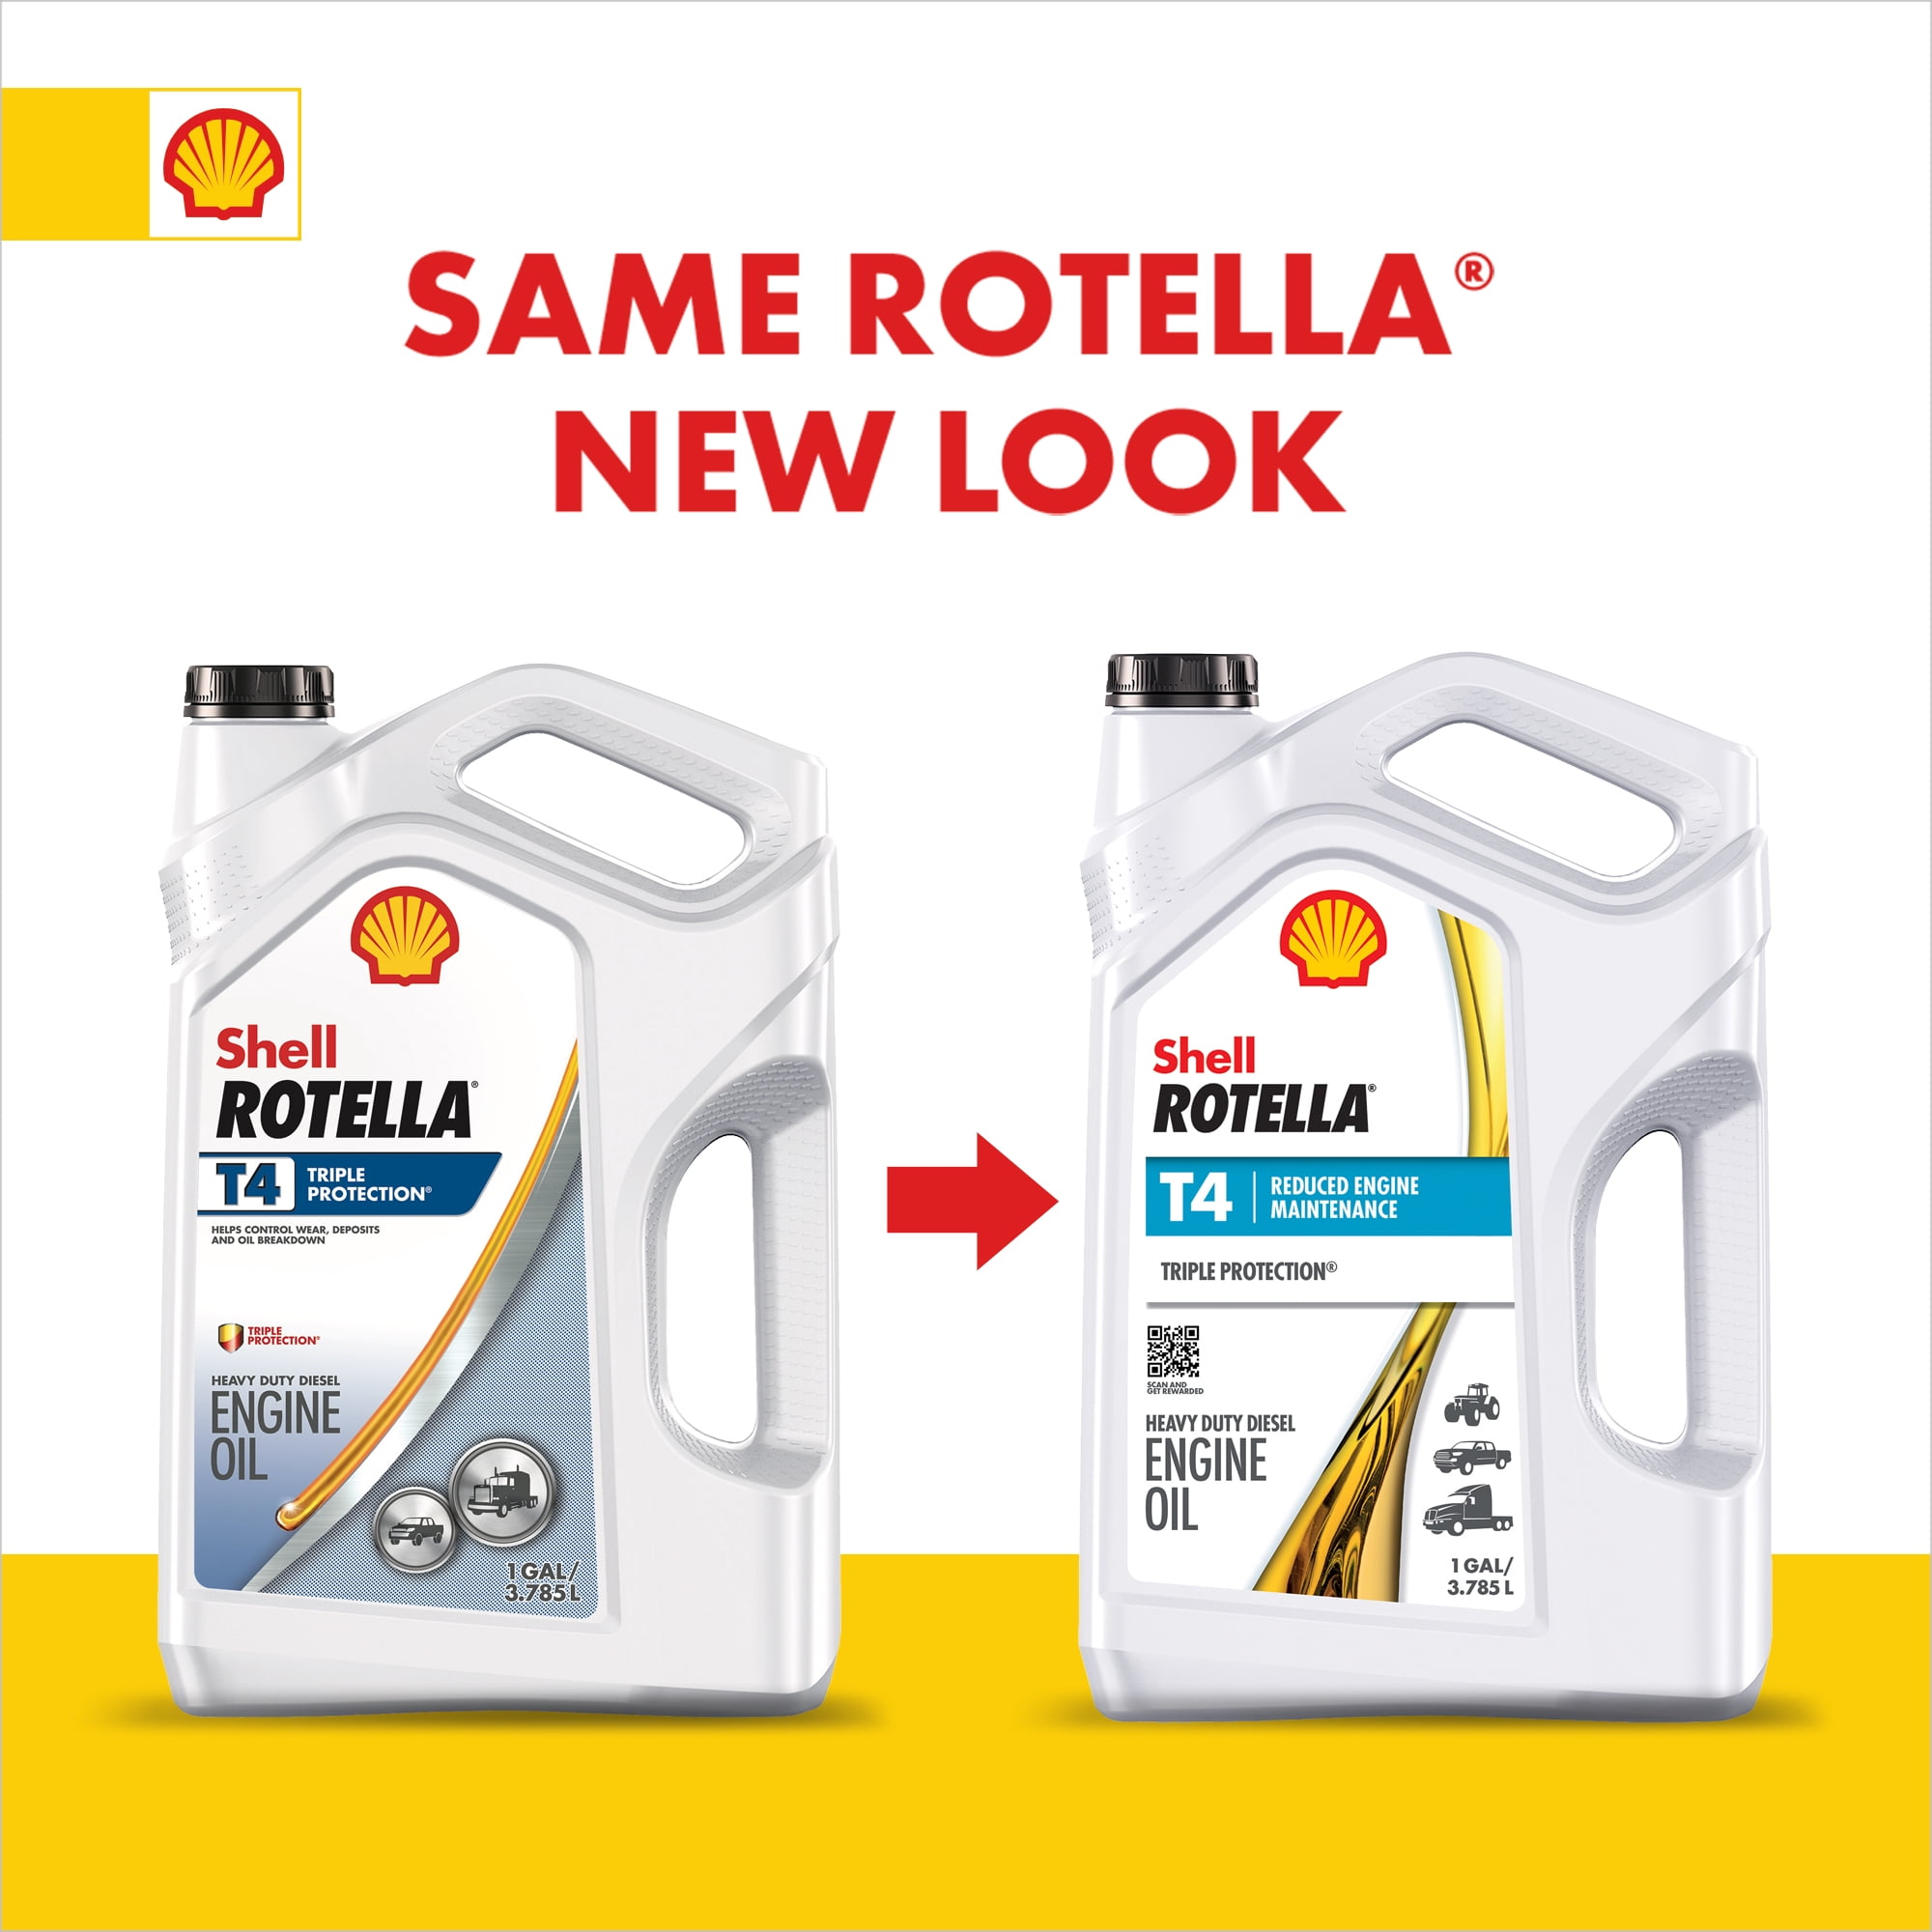 Shell Rotella T4 Triple Protection 15W-40 Diesel Motor Oil, 1 Gallon 